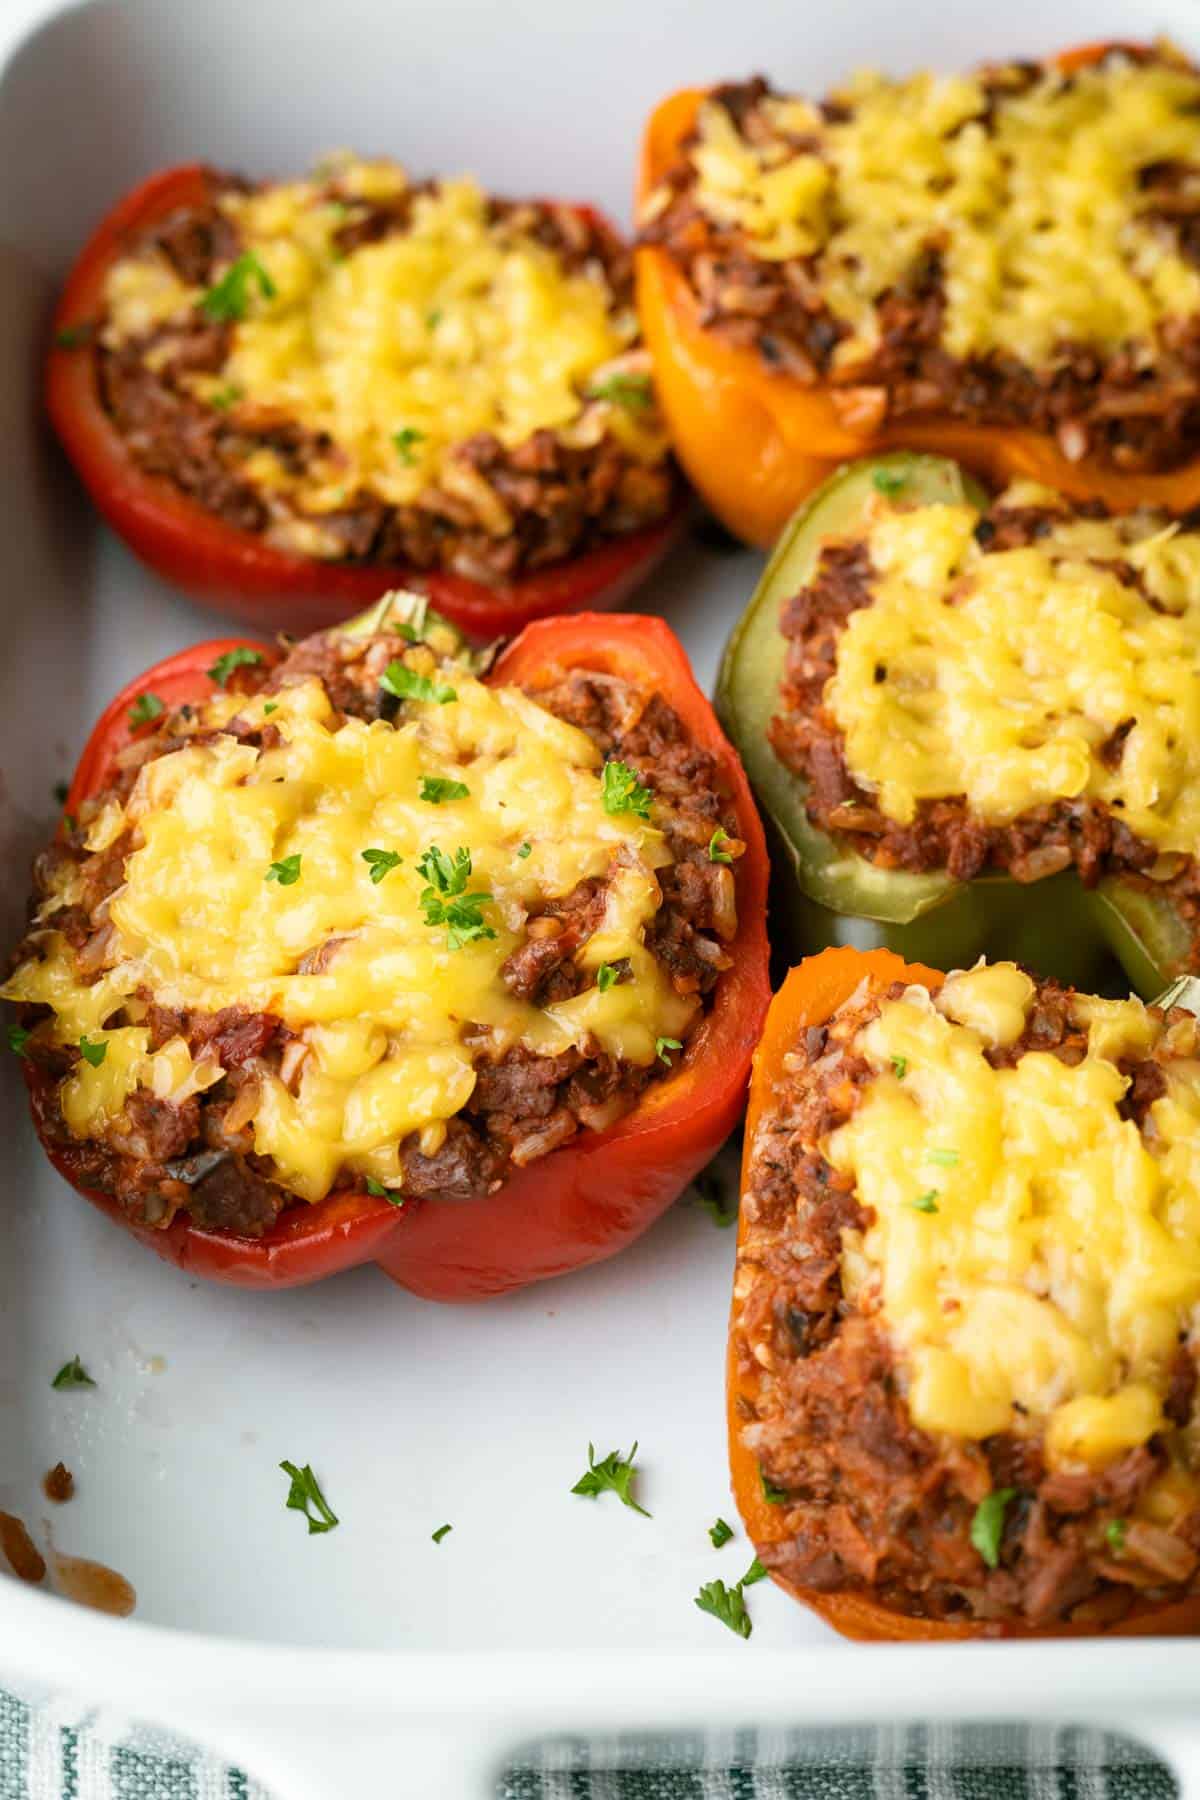 Baked stuffed peppers topped with melted vegan cheese.